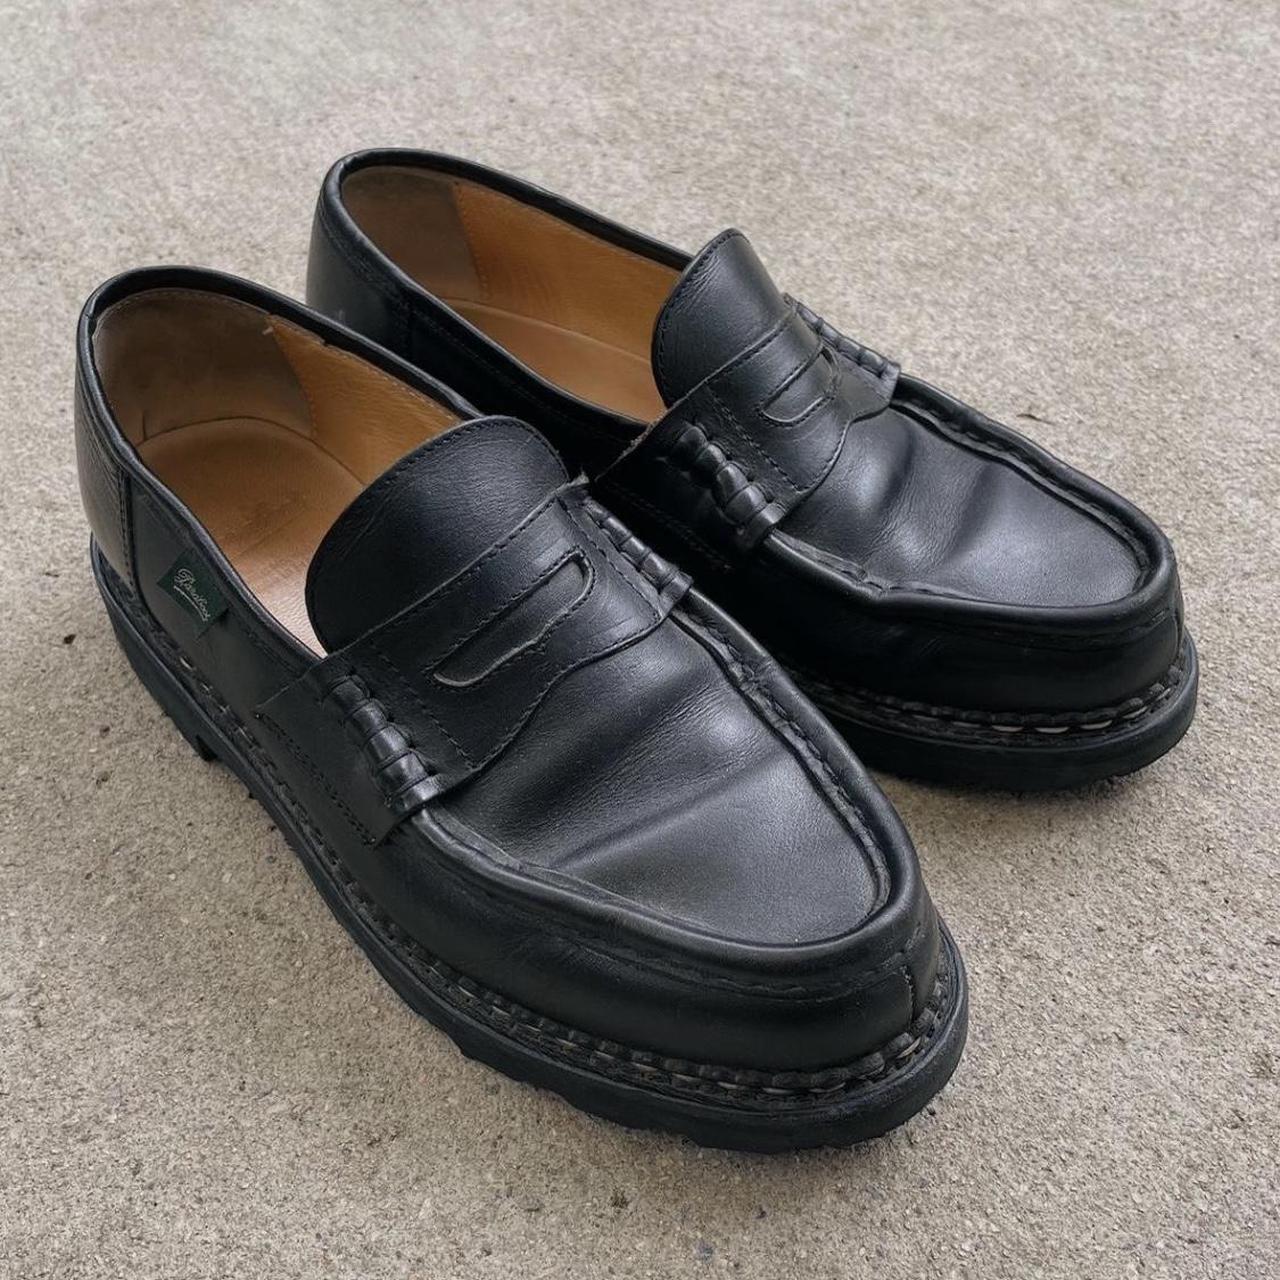 Paraboot Reims loafers Beautiful black leather penny... - Depop